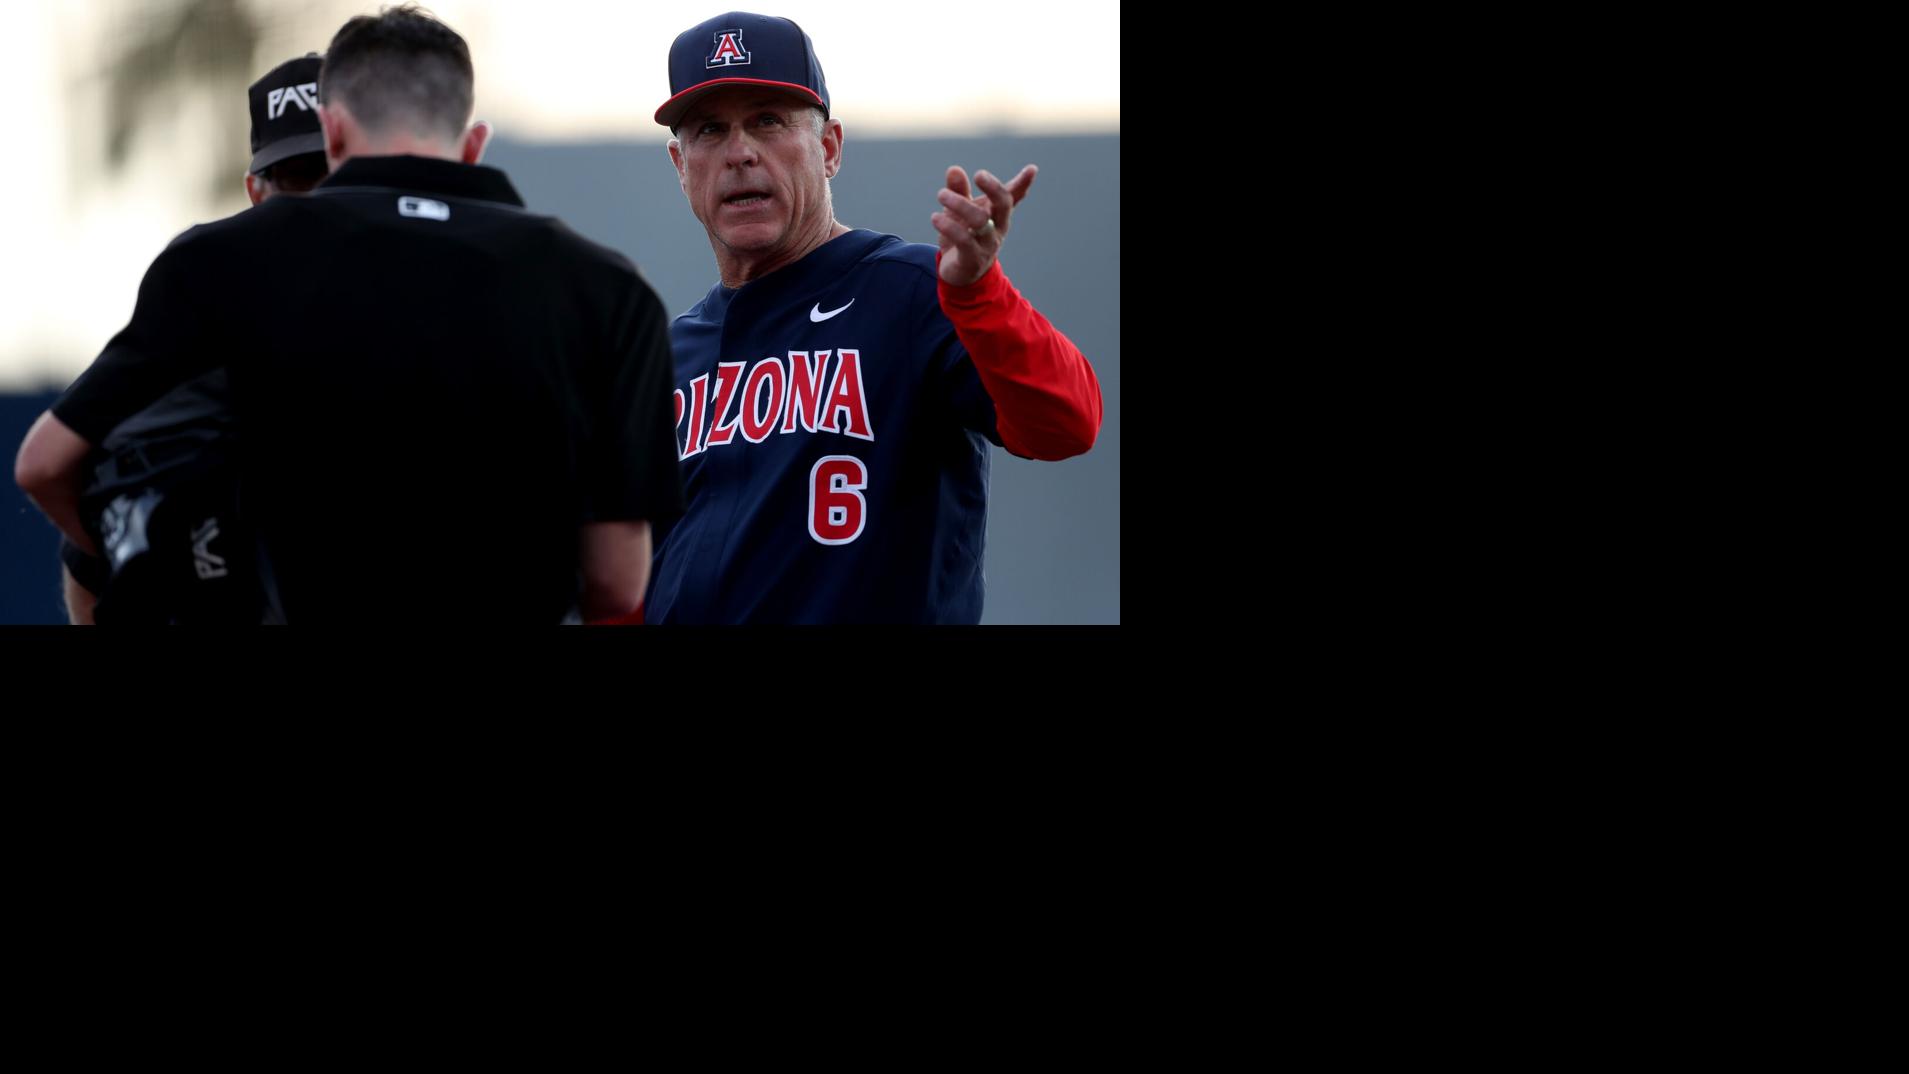 Arizona takes series from Washington thanks to strong pitching, clutch hitting